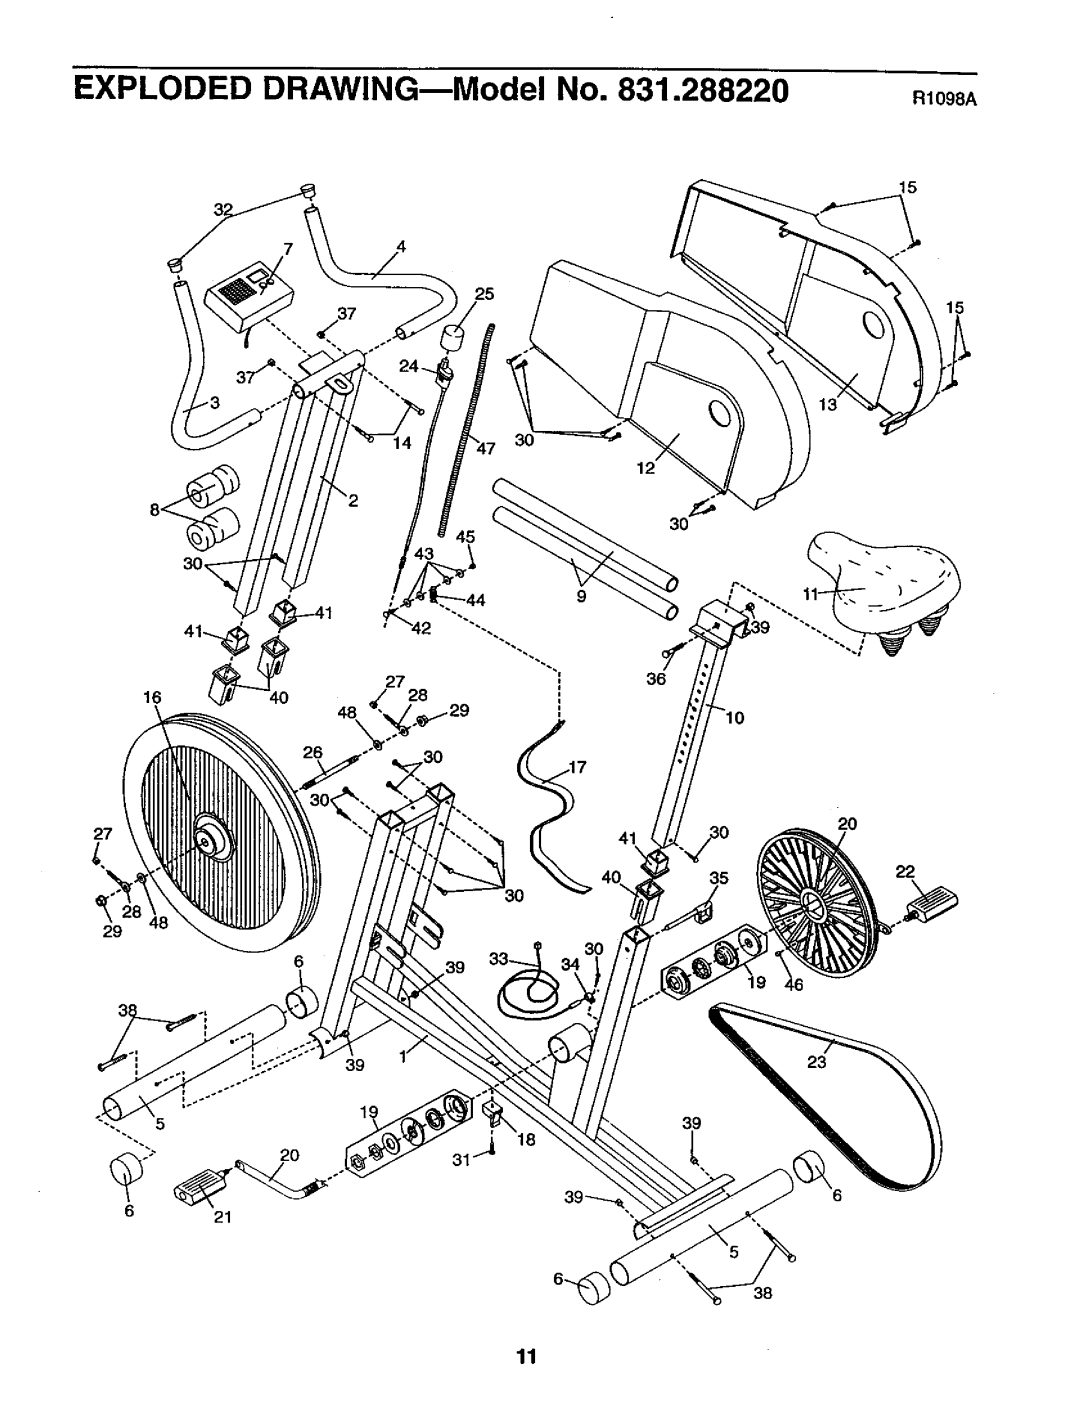 Sears 831.28822 user manual EXPLODED DRAWINGmModel No, RlO98A 